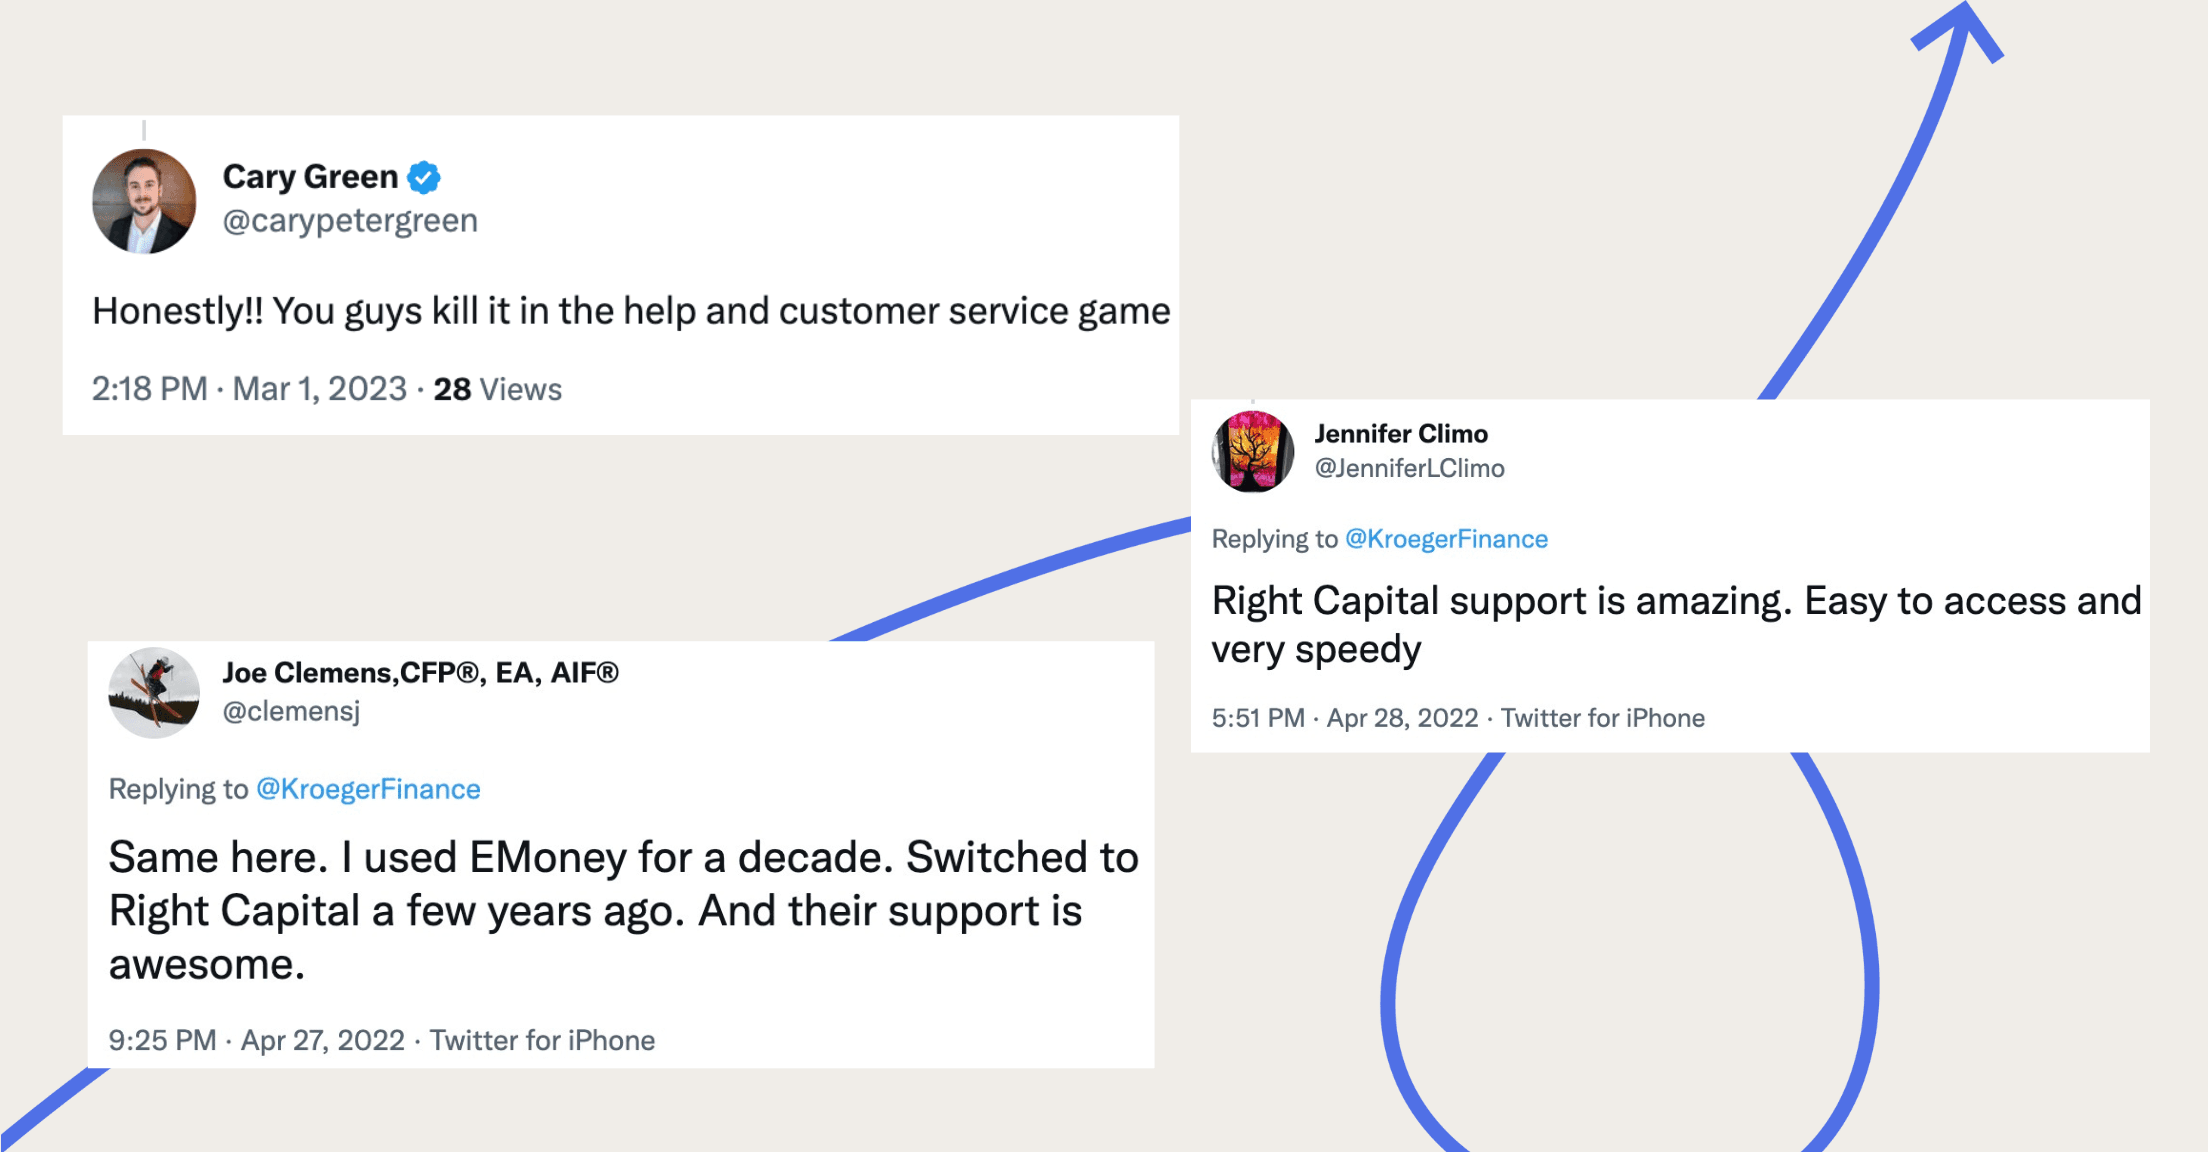 Tweets about how much advisors love the support team at RightCapital